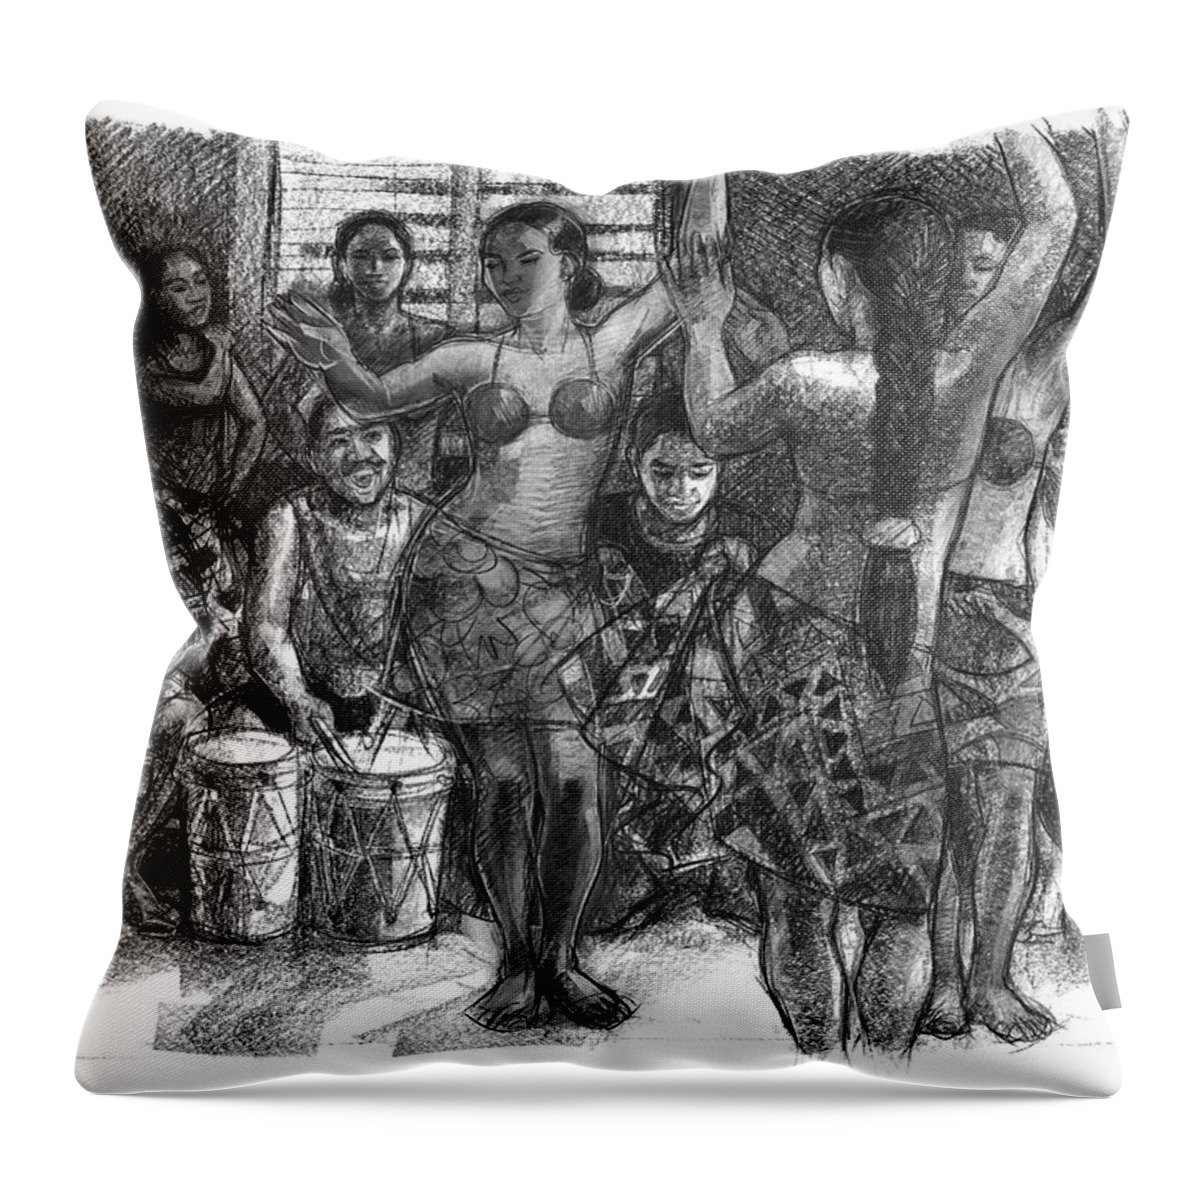 Dance Team Throw Pillow featuring the drawing Cook Islands Dance Team at Practice by Judith Kunzle